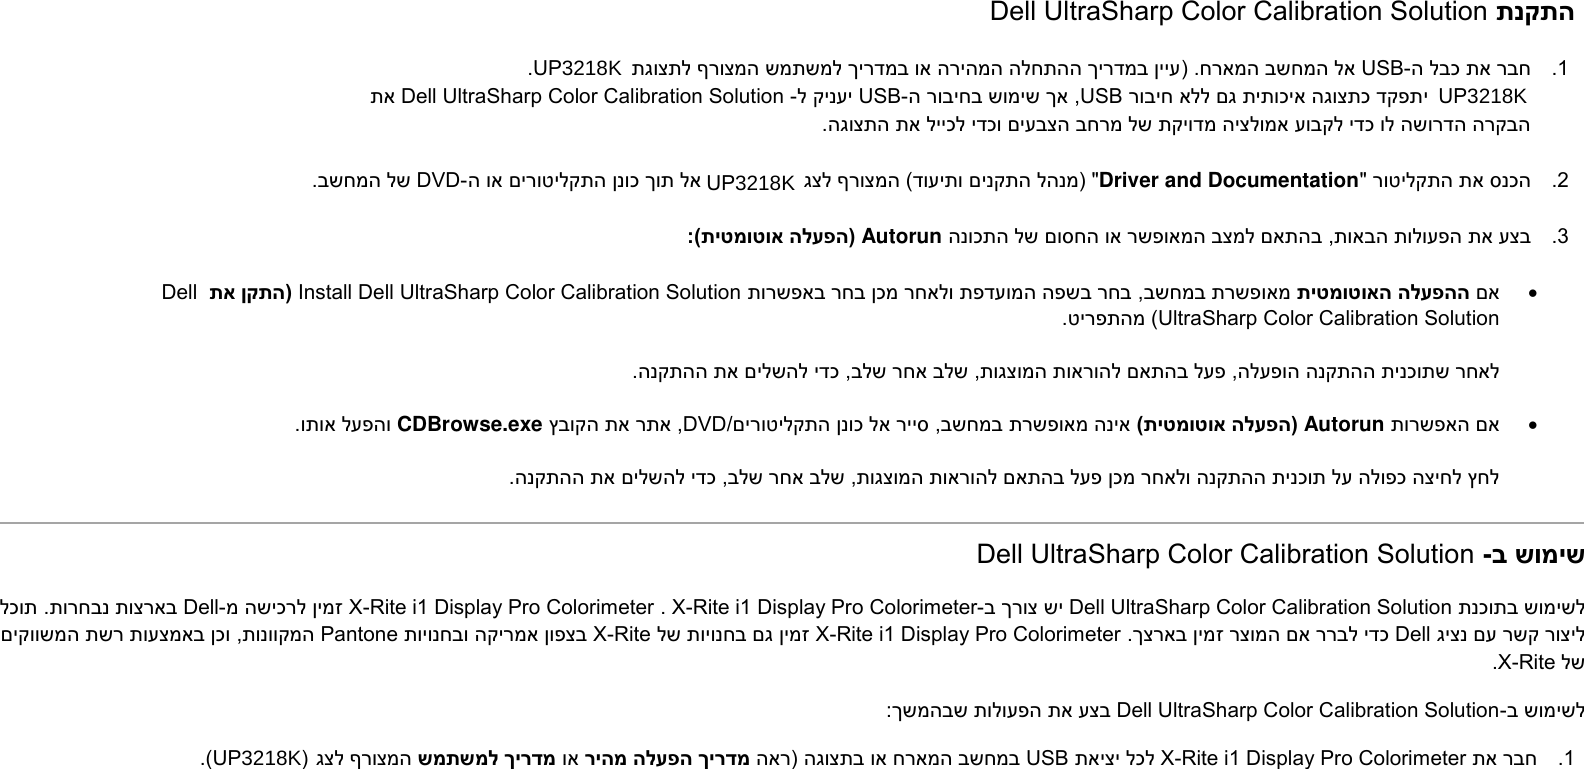 Page 2 of 3 - Dell Dell-up3218k-monitor UltraSharp UP3218K Color Calibration Solution מדריך למשתמש User Manual Ultra Sharp User's Guide3 He-il